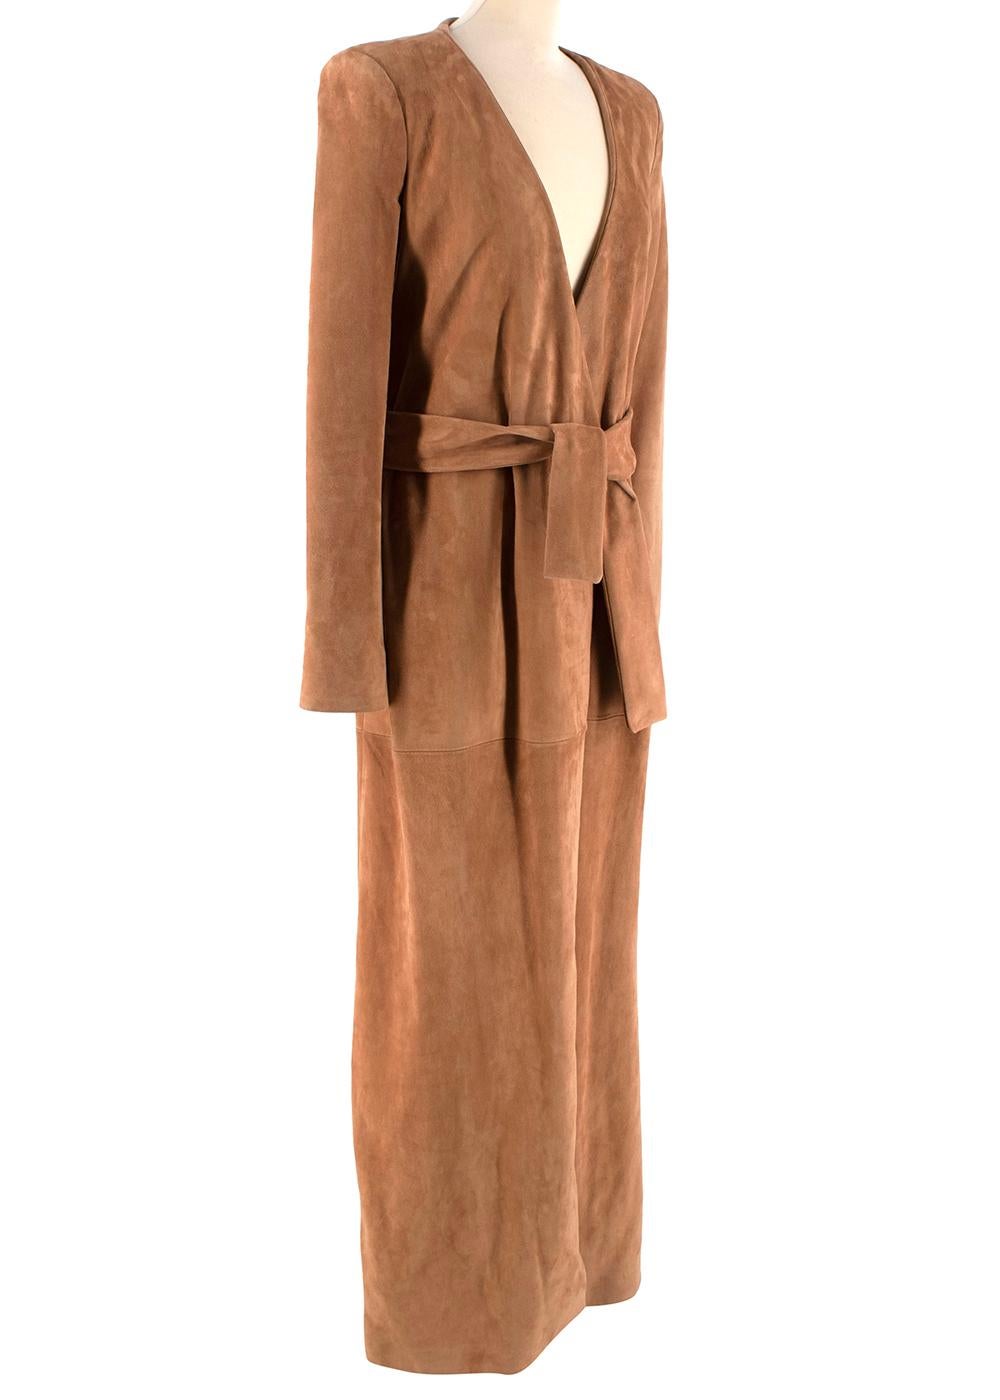 Balmain Long Brown Tie Up Women Coat

- Long brown panelled coat 
- Tie up straps around the waist
- V-neckline 
- No pockets
 
Materials:
100% lamb skin 
Lining - 52% viscose, 42% cotton  

Made in France
Do not wash
Cleaned by specialist only
Dry